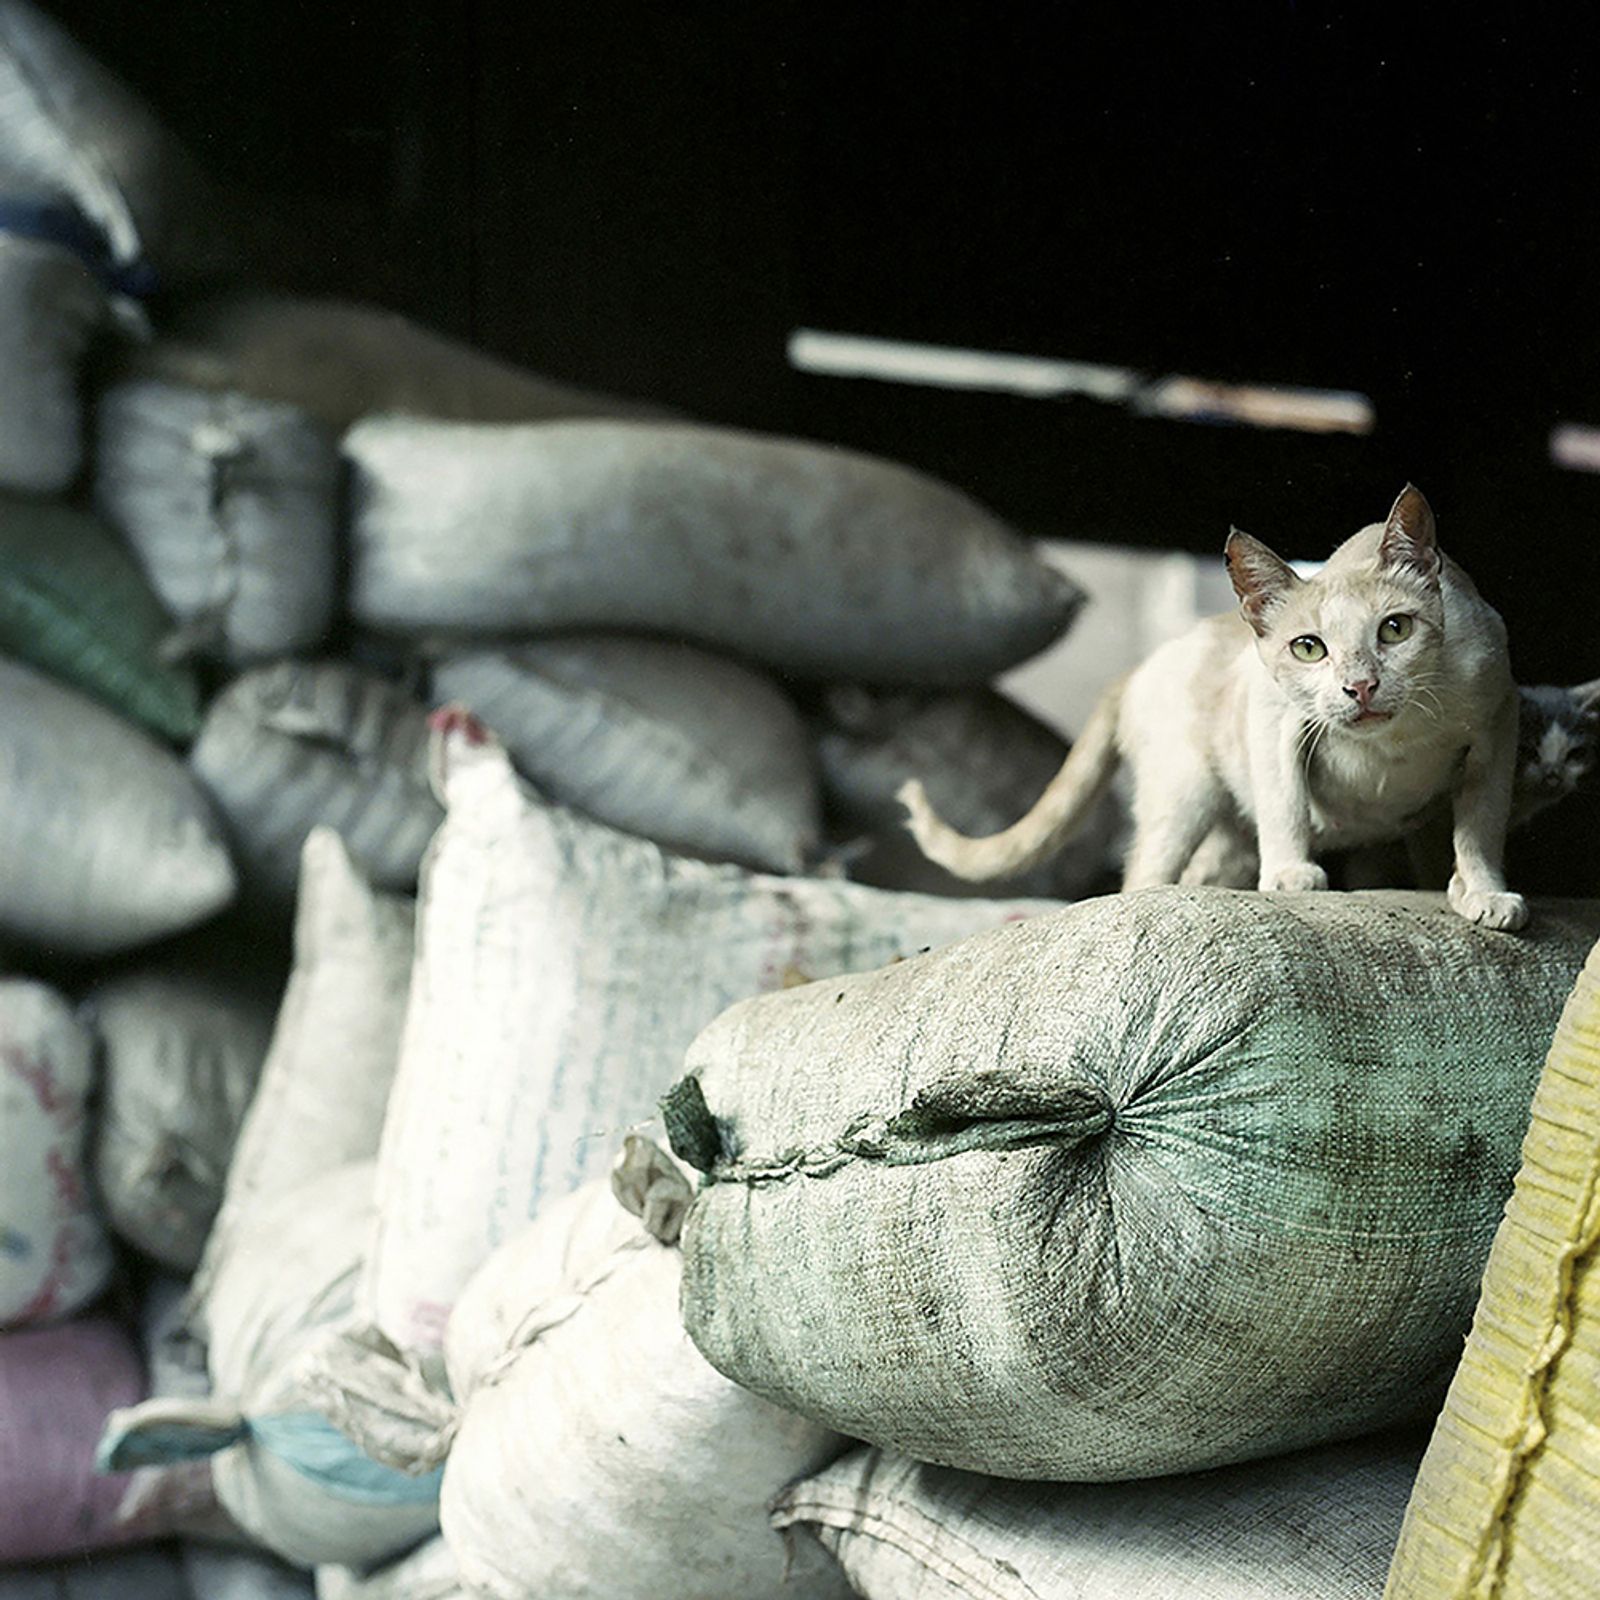 © Loulou d’Aki - Cairo cat on a pile of jute bags in Mukkatam, also called Garbage city, in Cairo.